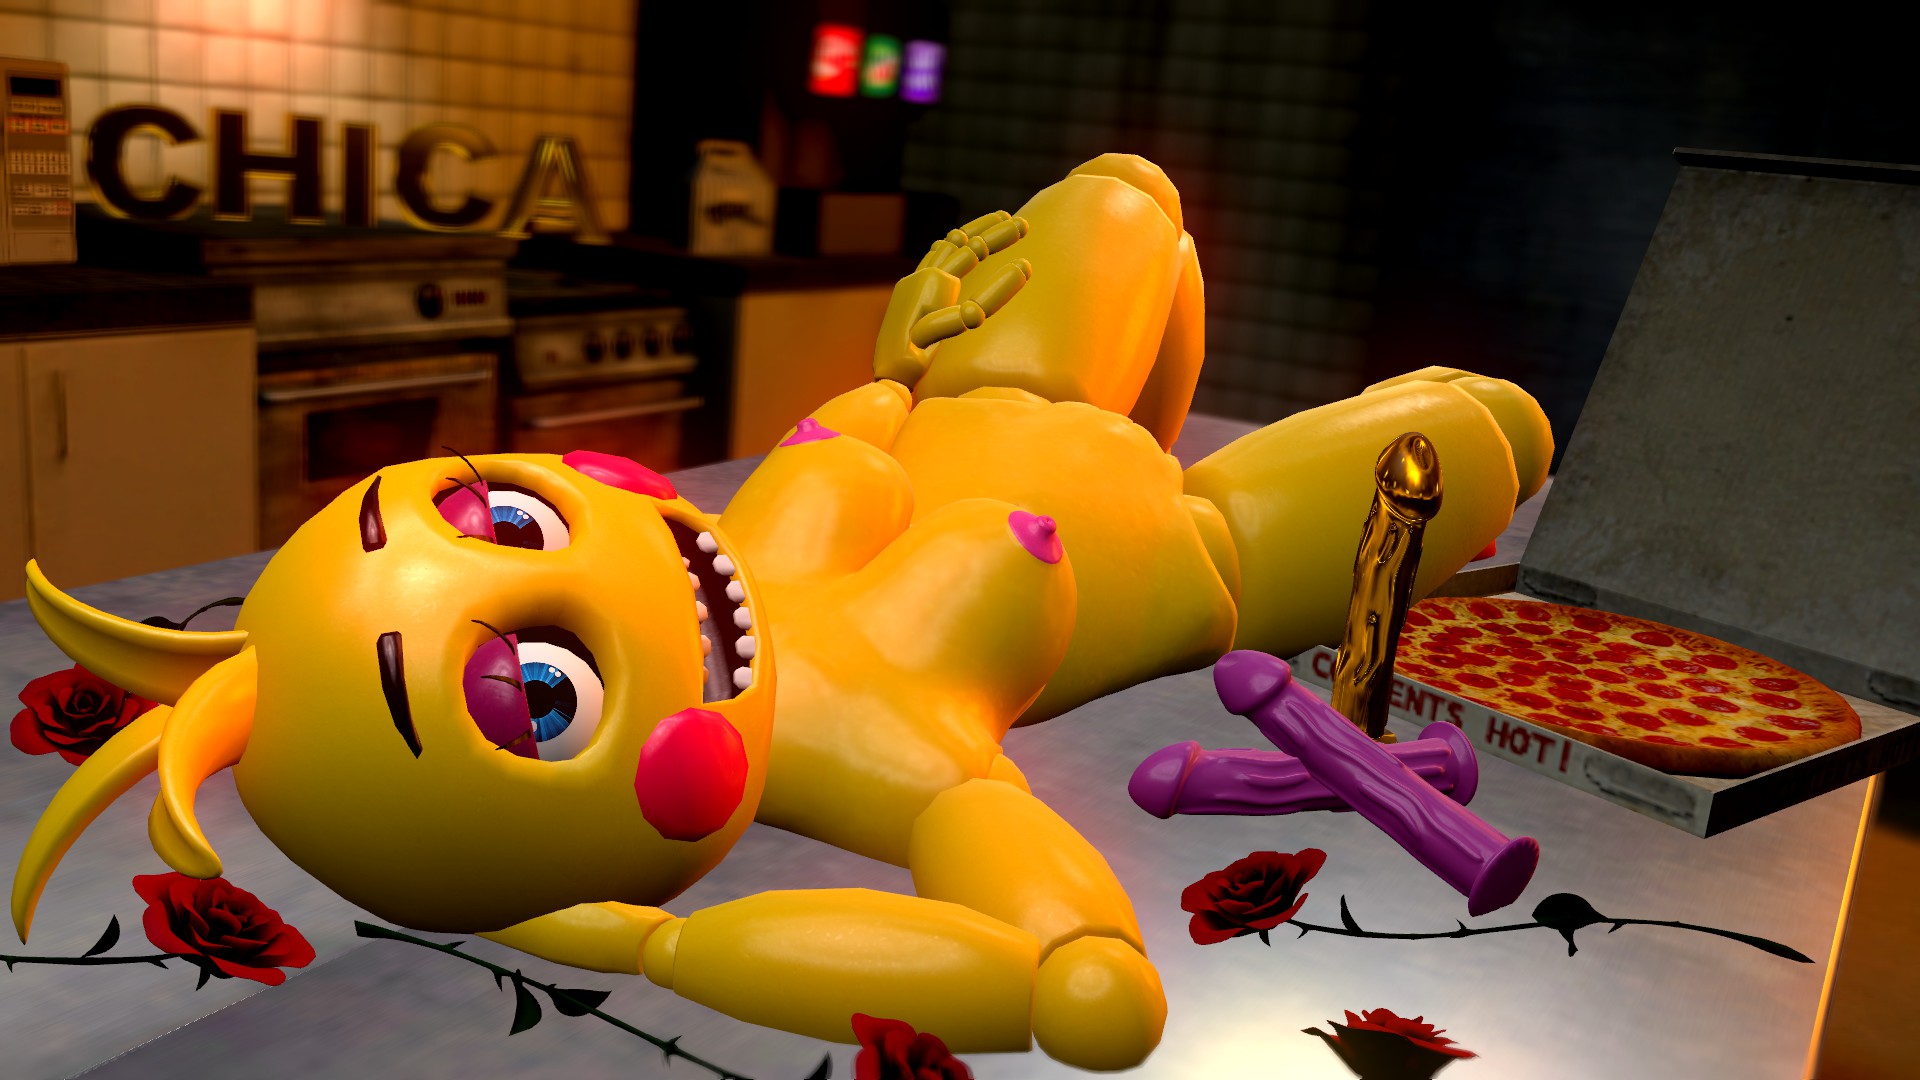 Toy chica porn fnaf - 🧡 Порно Фнаф Toy Chica.